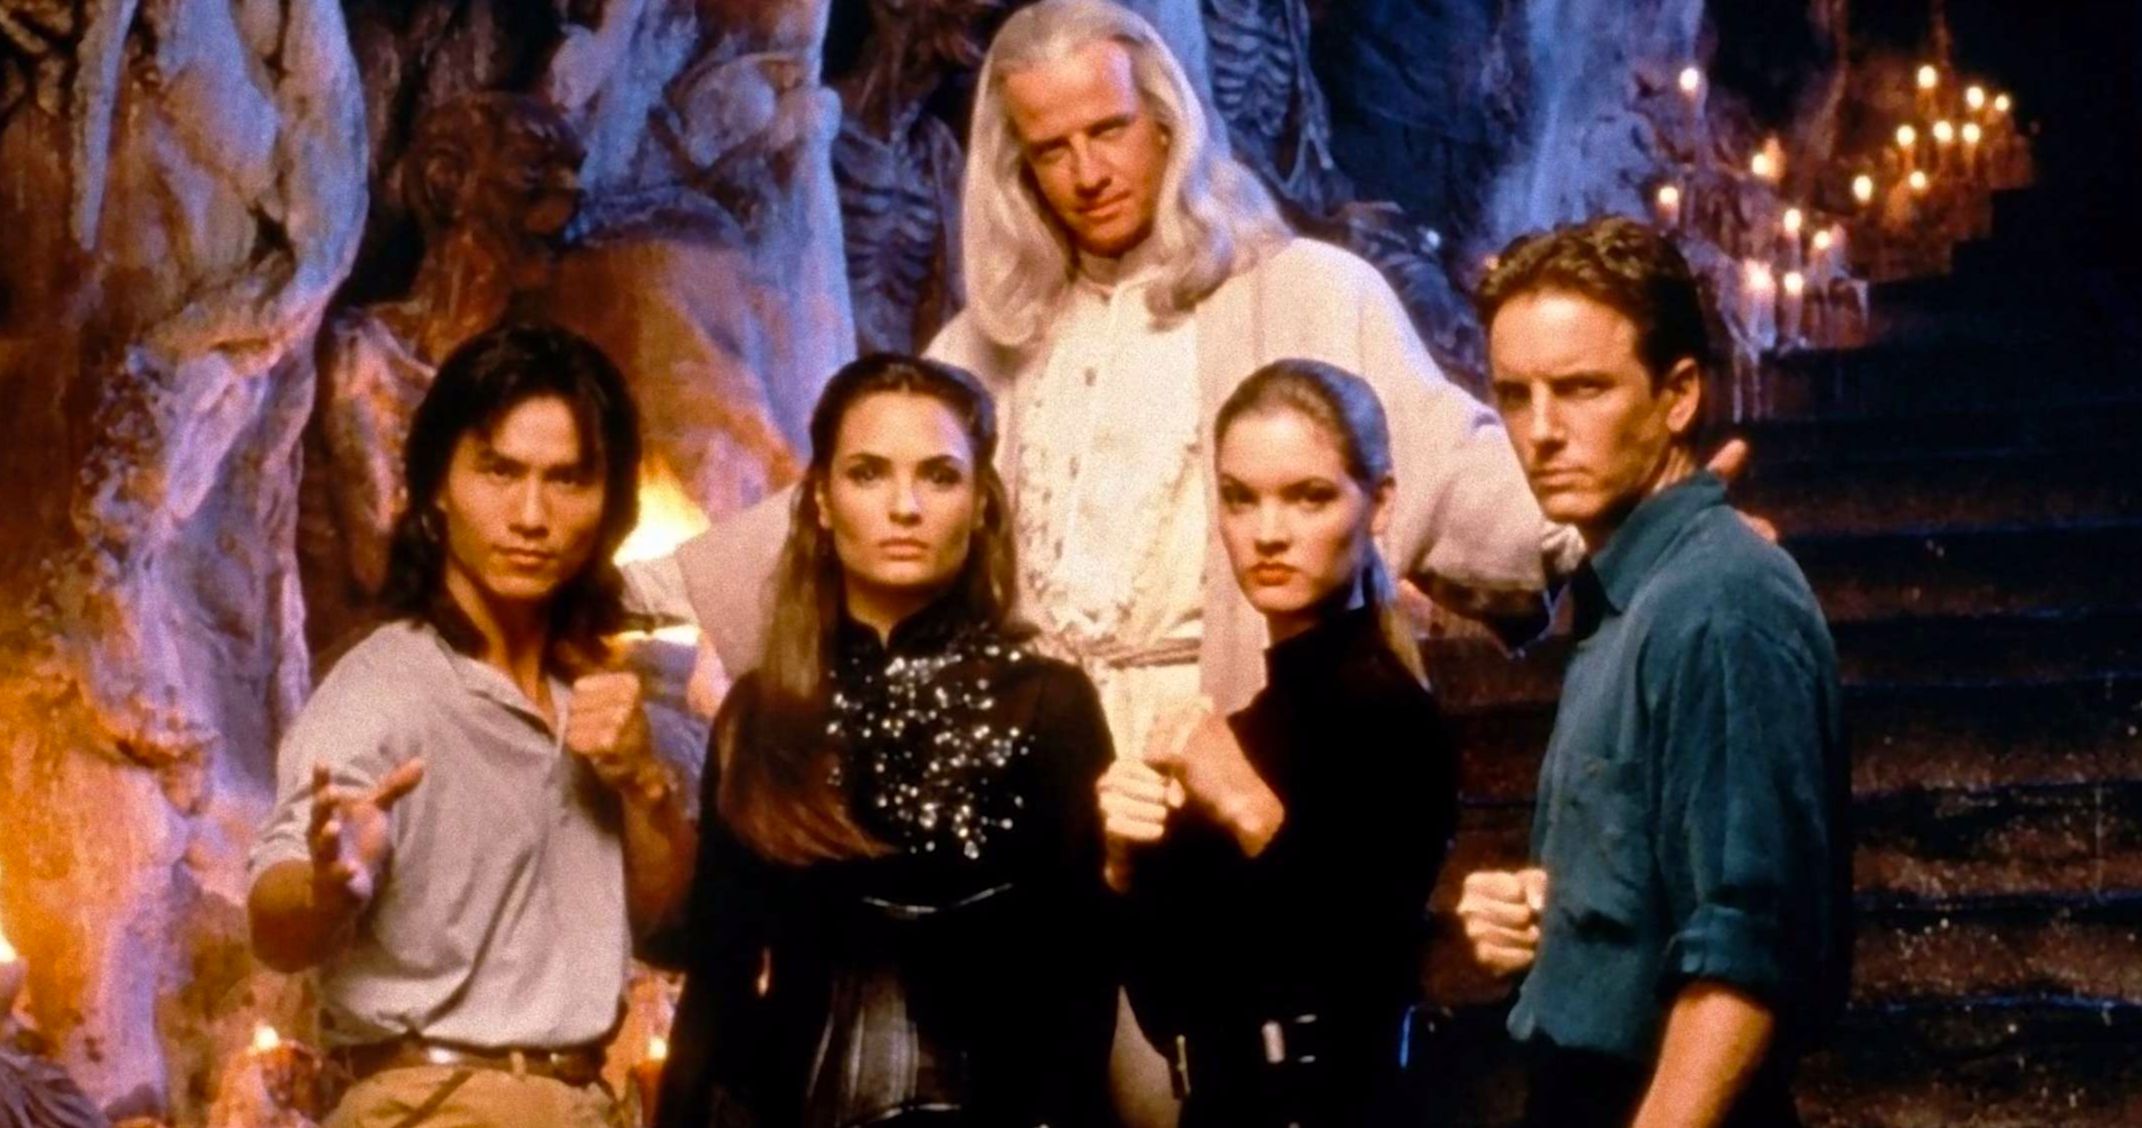 Original Mortal Kombat Movie Director Is Excited for Reboot, Will Show Up as a Fanboy